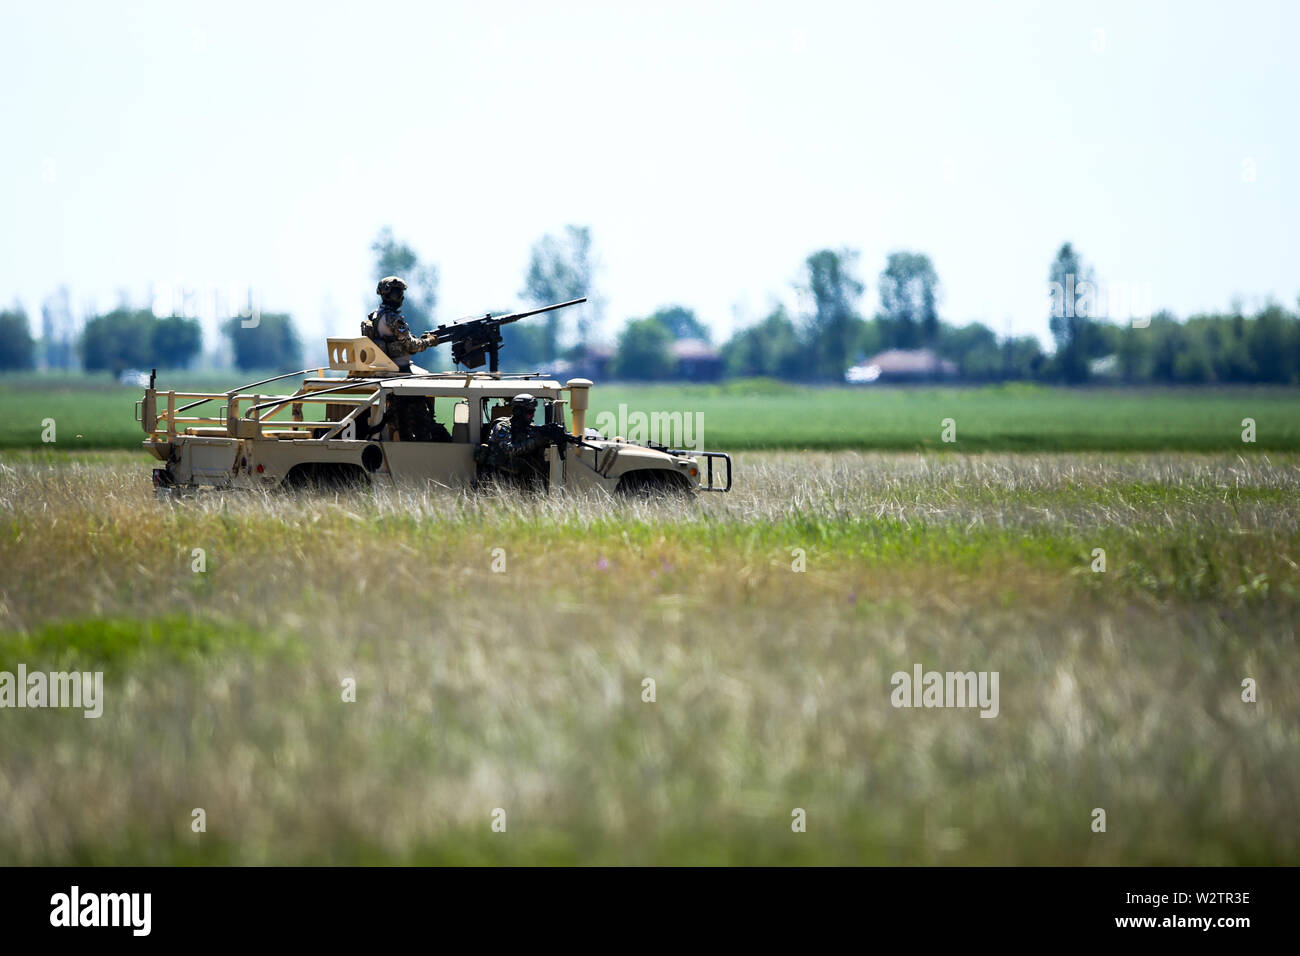 Boboc, Romania - May 22, 2019: Romanian soldiers man a Humvee armored vehicle on a field, on a sunny summer day during a drill. Stock Photo